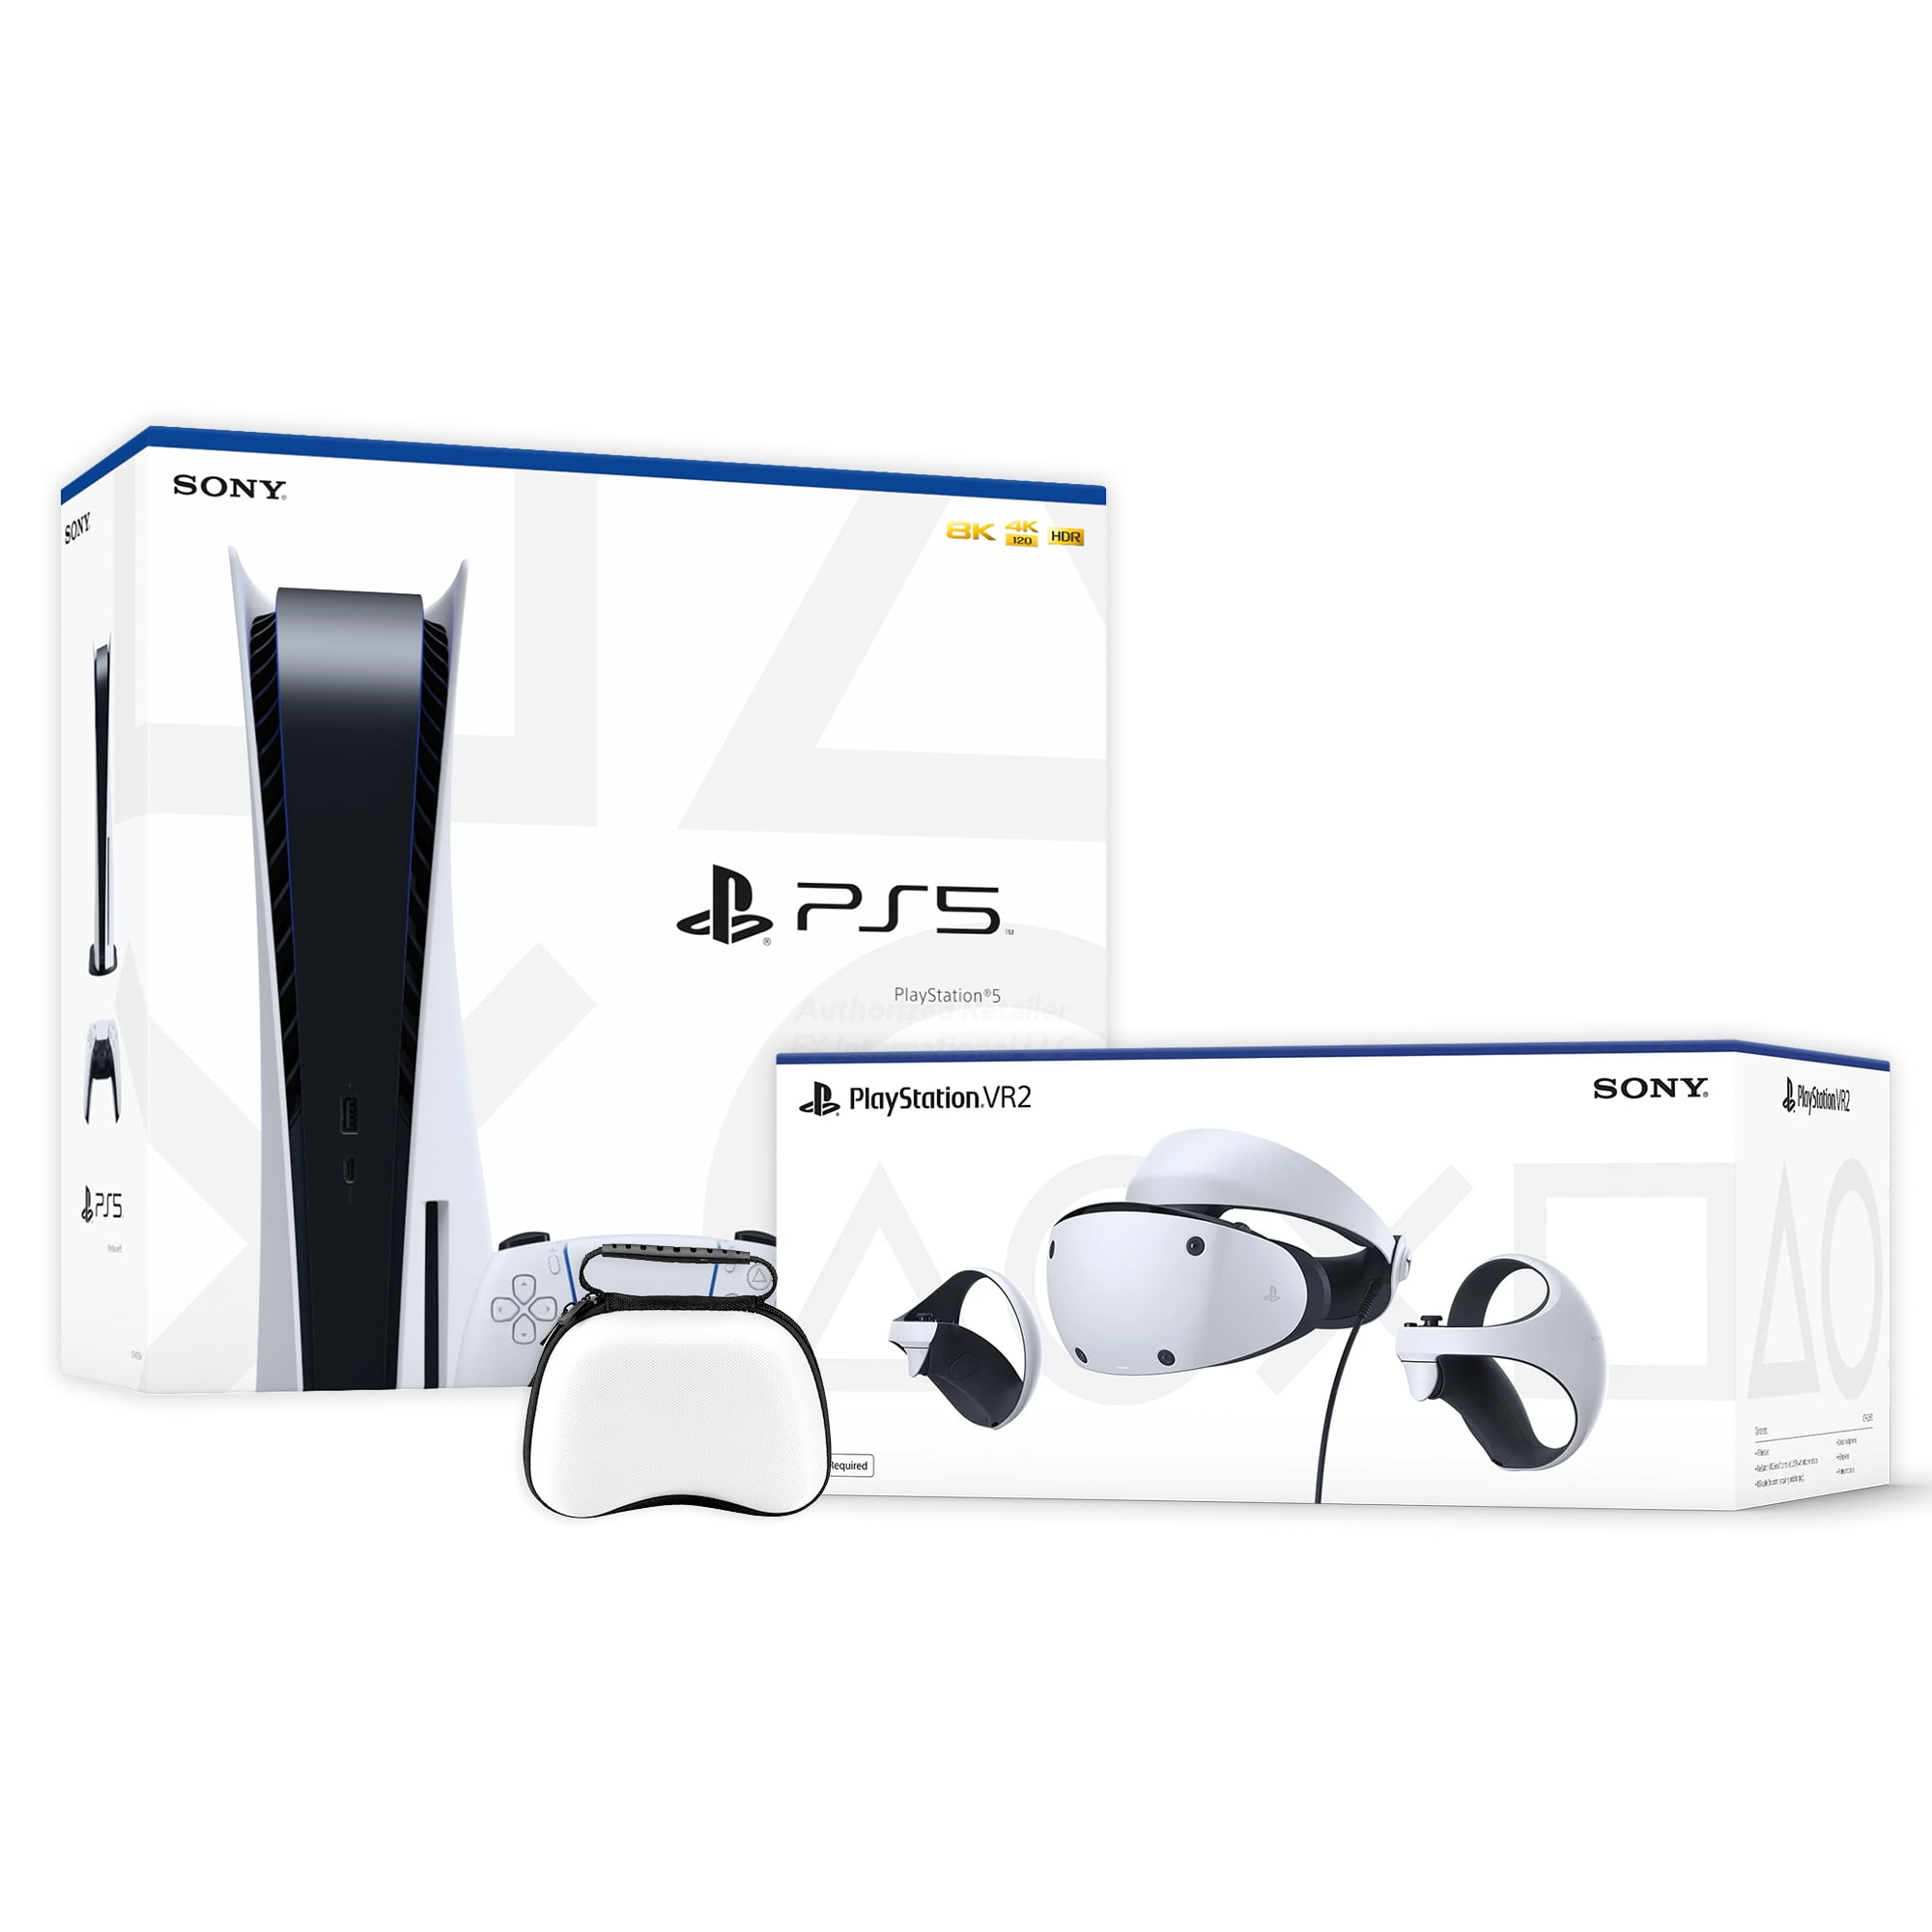 PlayStation 5 & PSVR2 Deluxe Combo, VR2 Headset, Sense Controllers, PS5  Disc Console, DualSense, 4K HDR Advanced Rendering, Eye Tracking,  Adjustable